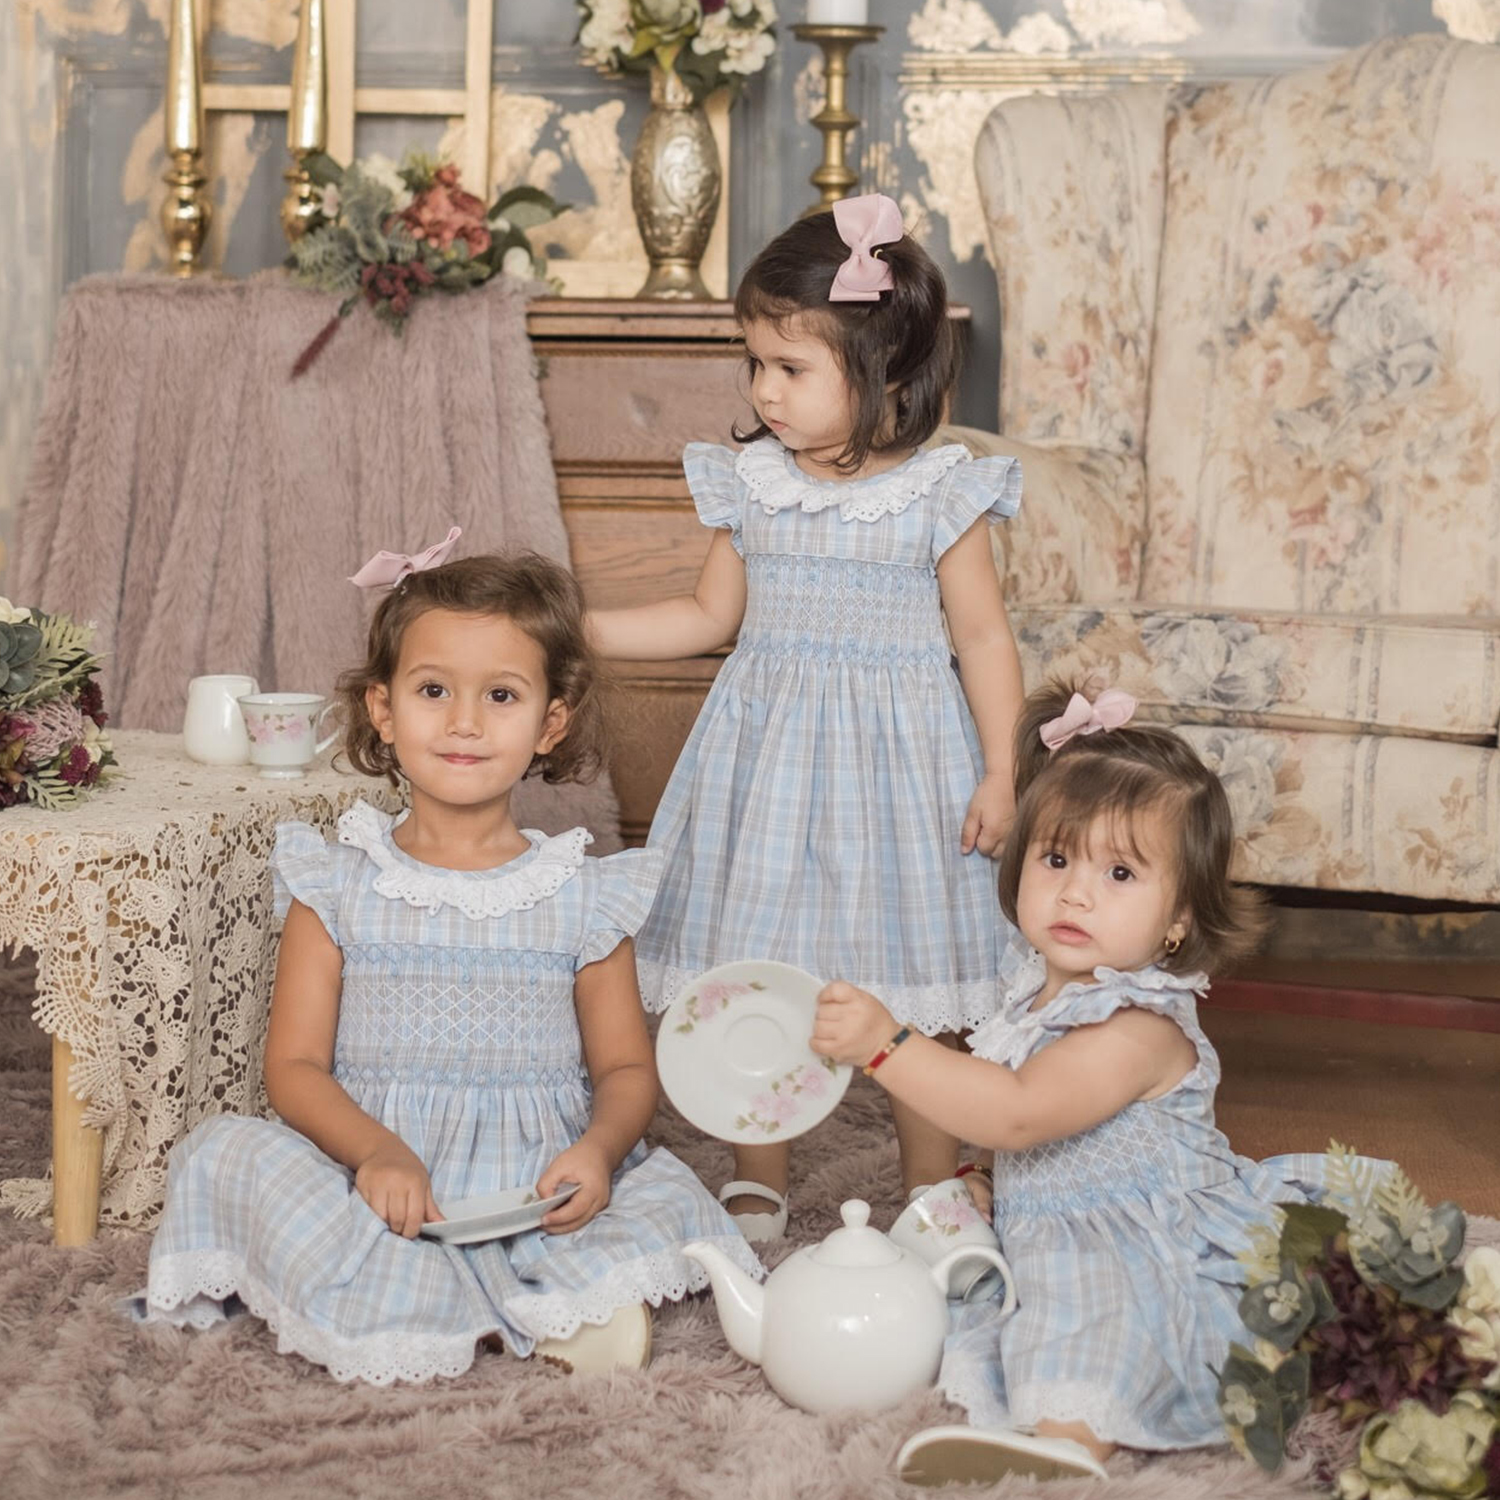 Laurel & Co. fashion and style for toddlers and babies, story published on Metro Mom by Meghann Hernandez